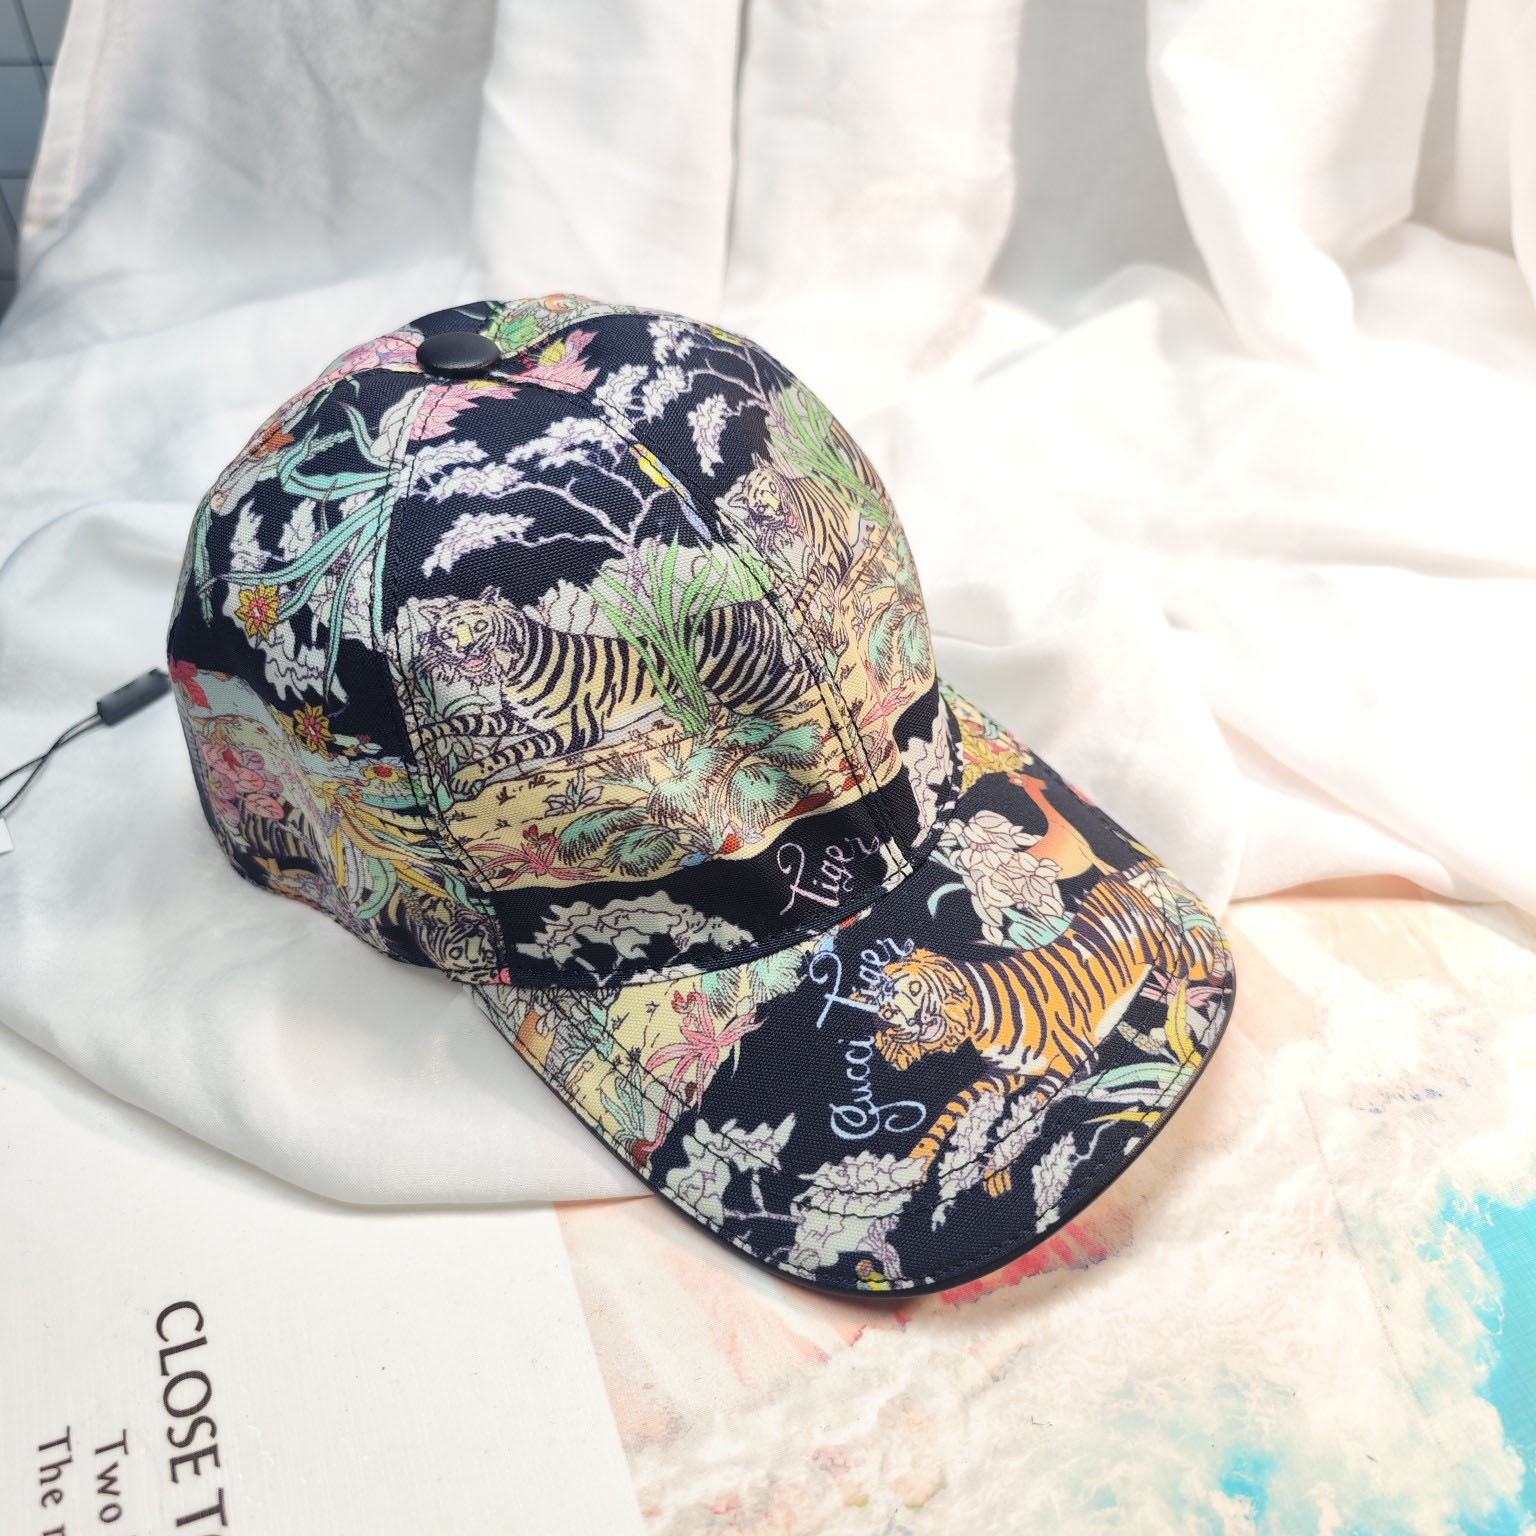 Couple Fashion Designer Ball cap Summer Vacation Sports Luxury Tiger Pattern Embroidery casquette